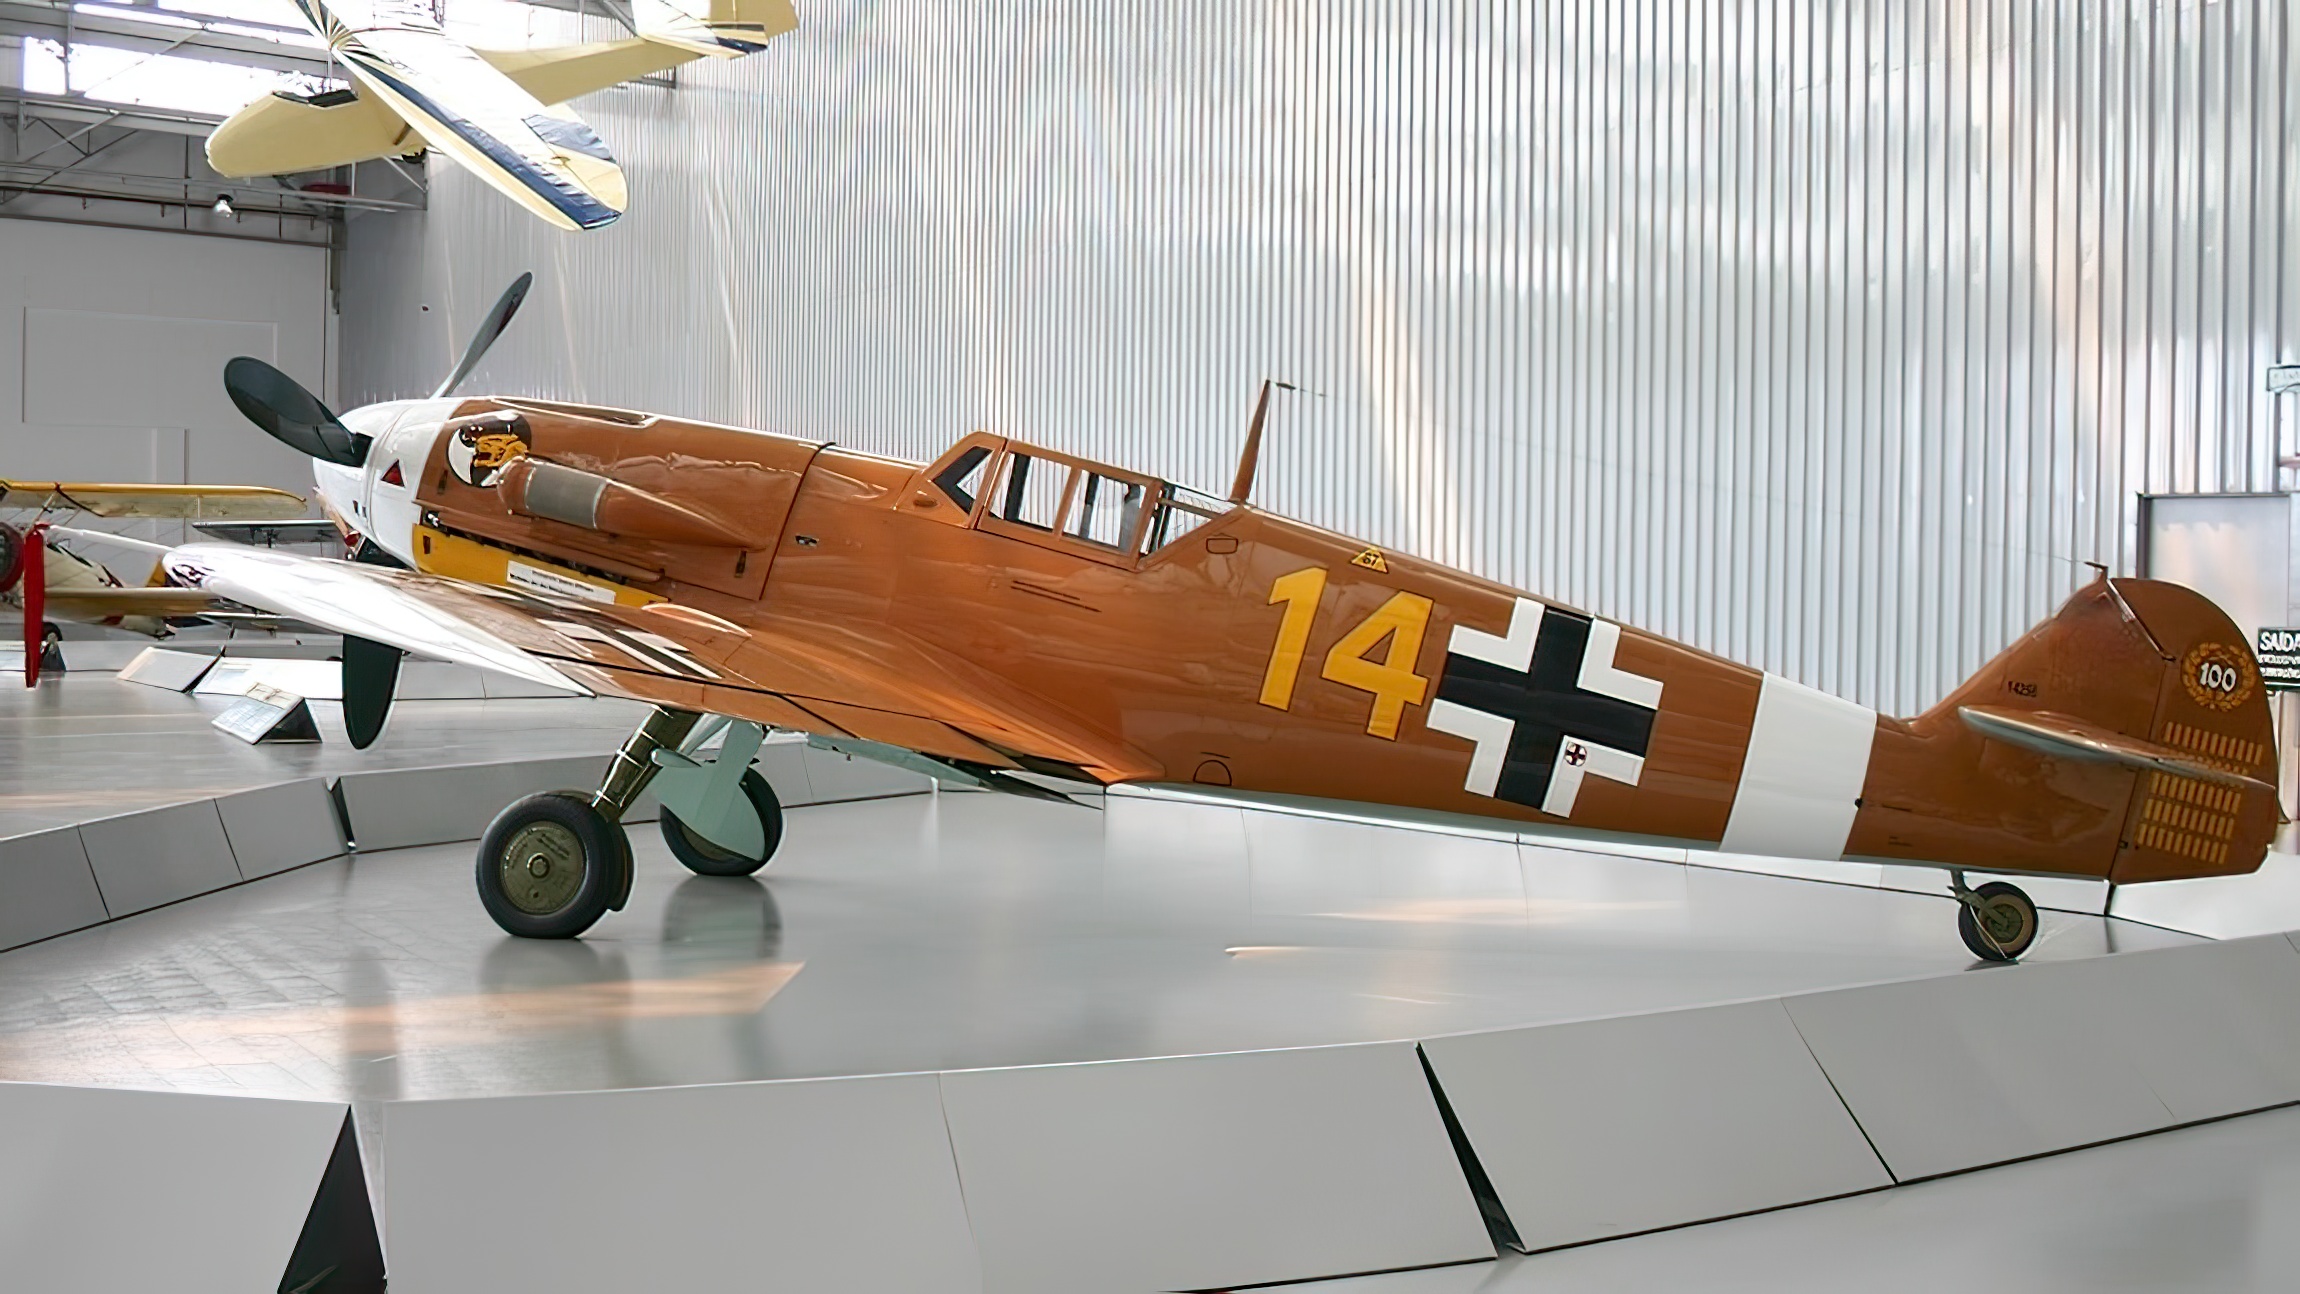 Bf 109 G-2 painted with markings of Marseille's aircraft on display at the Museu TAM in São Carlos, Brazil